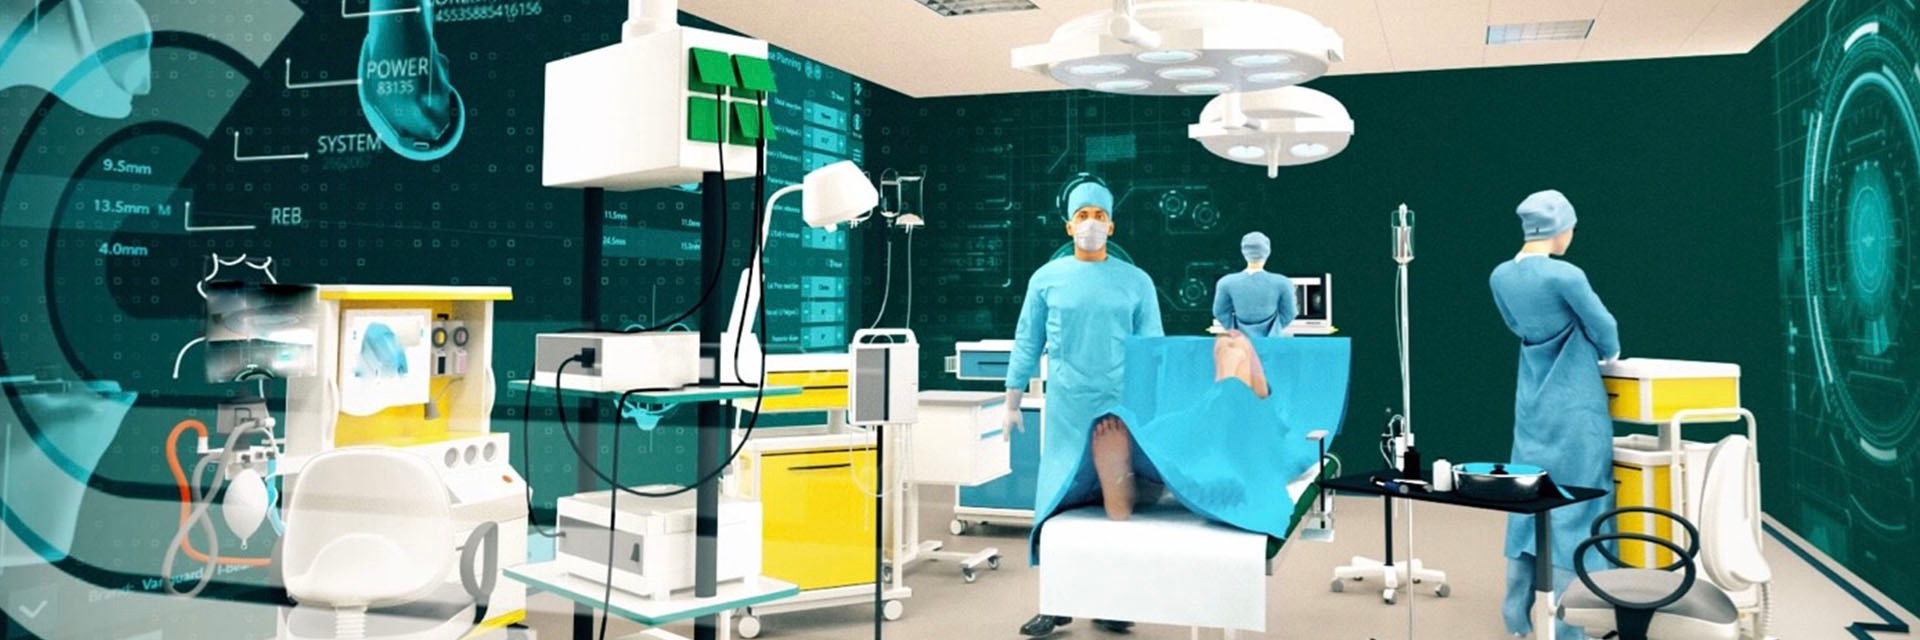 AI environment of surgeons in an OR during a knee surgery